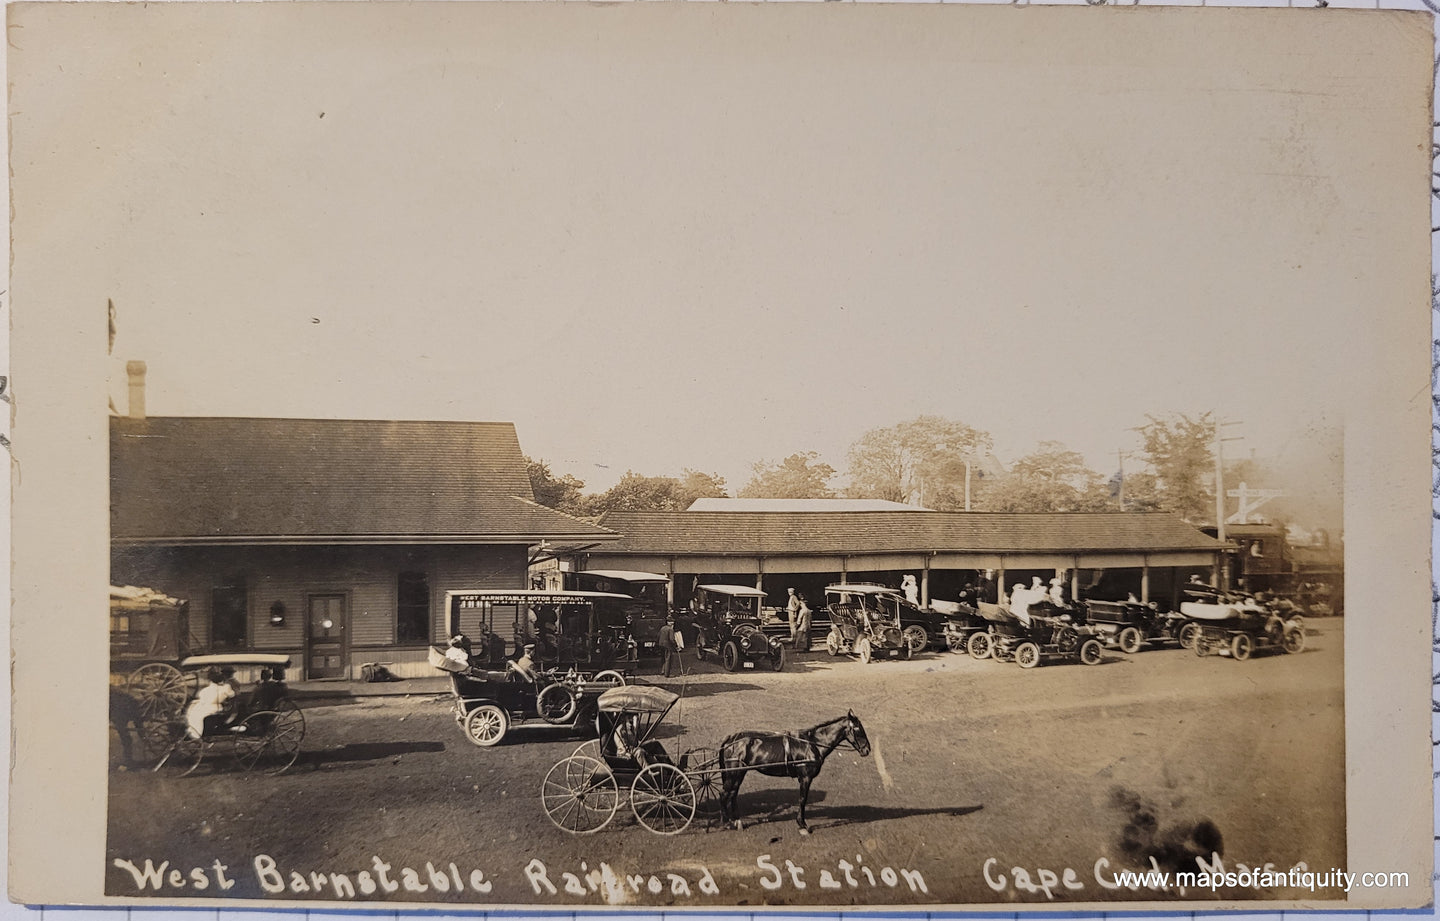 1907 - West Barnstable Railroad Station Cape Cod, Mass. - Real Photo Postcard - Antique